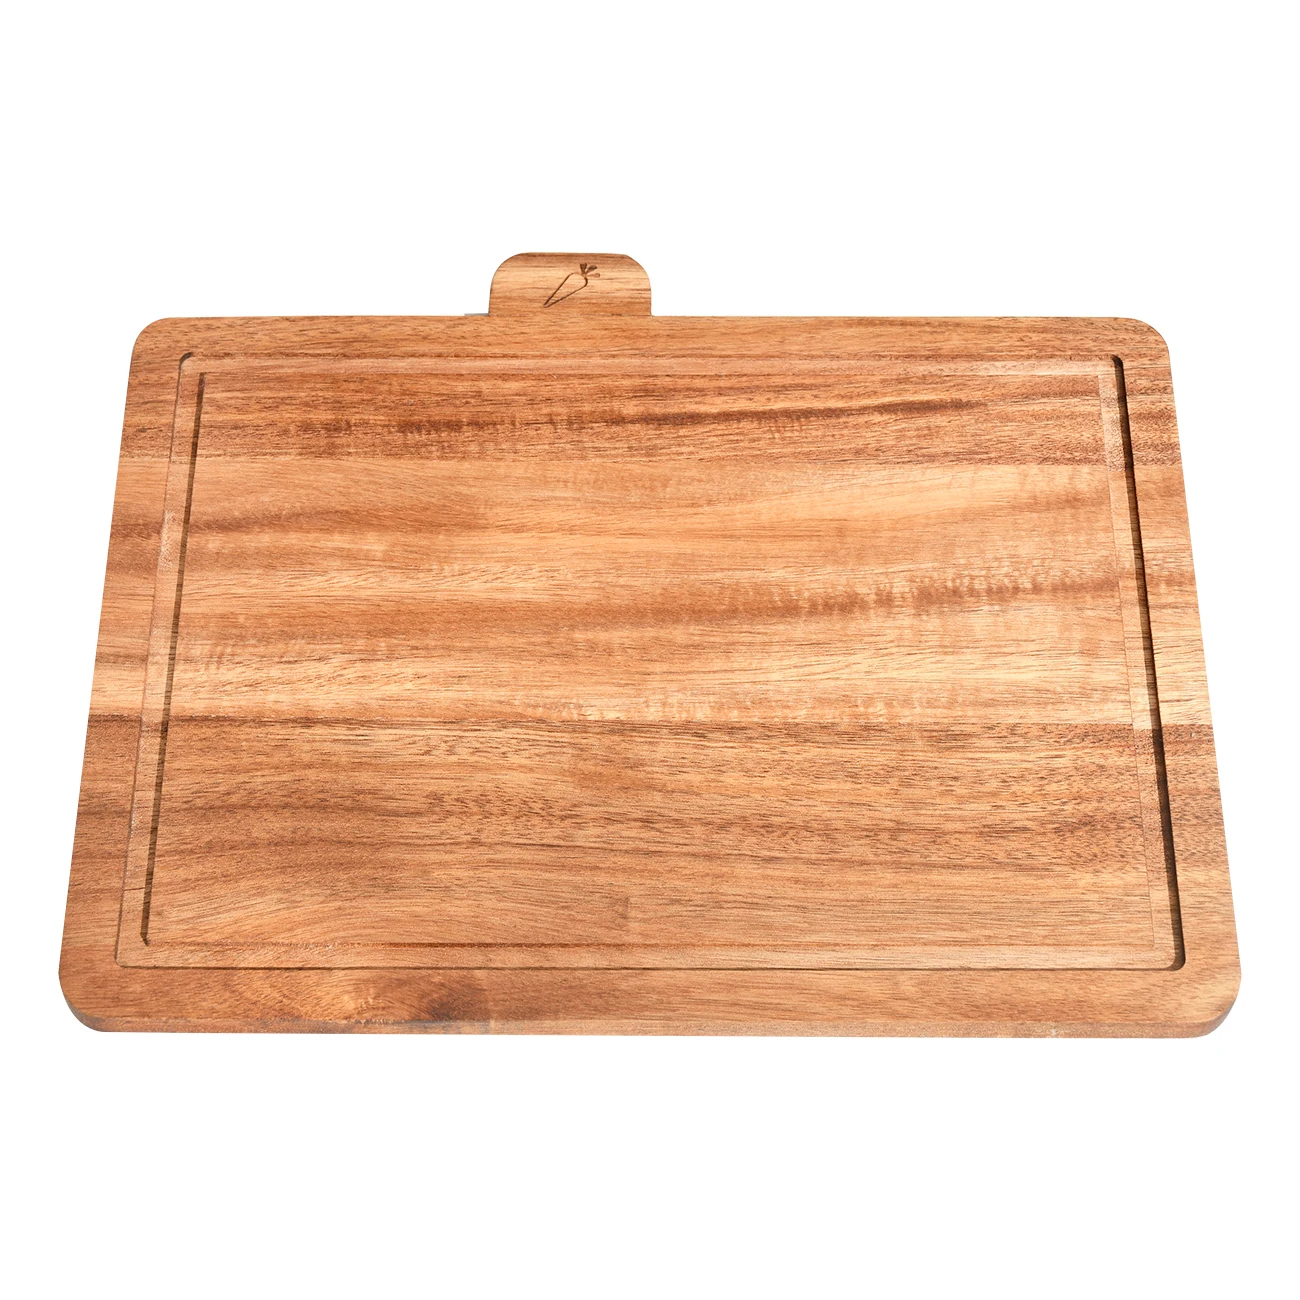 Wholesale Eco-friendly Acacia Wood Chopping Boards Wooden Bamboo Cutting Board Set for Kitchen with Holder